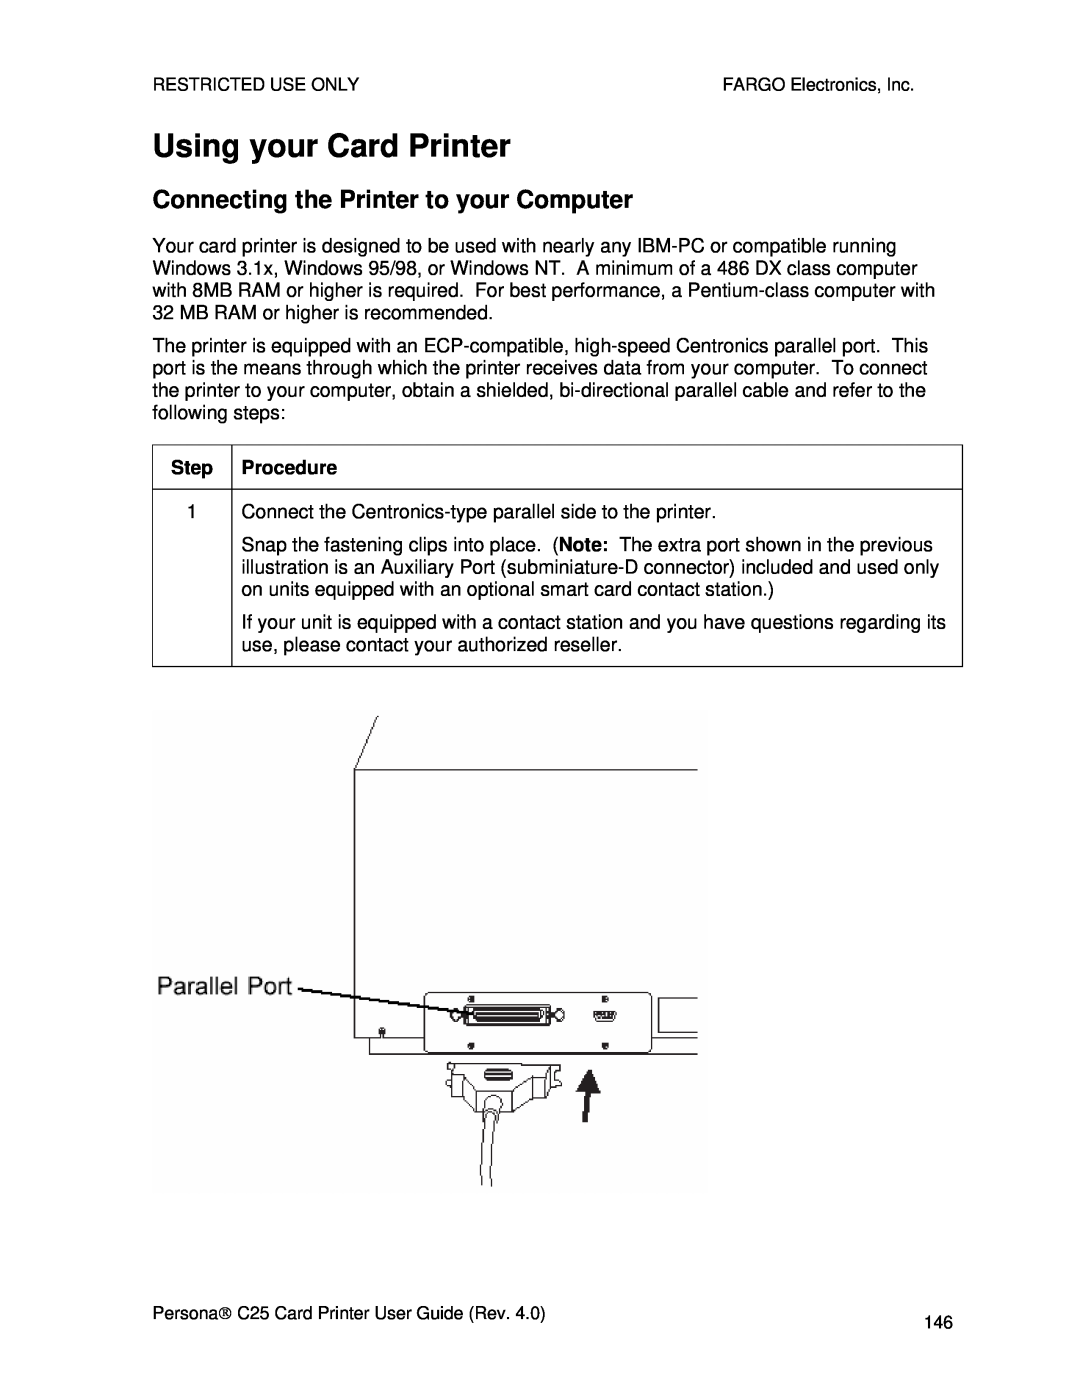 FARGO electronic S000256 manual Using your Card Printer, Connecting the Printer to your Computer 